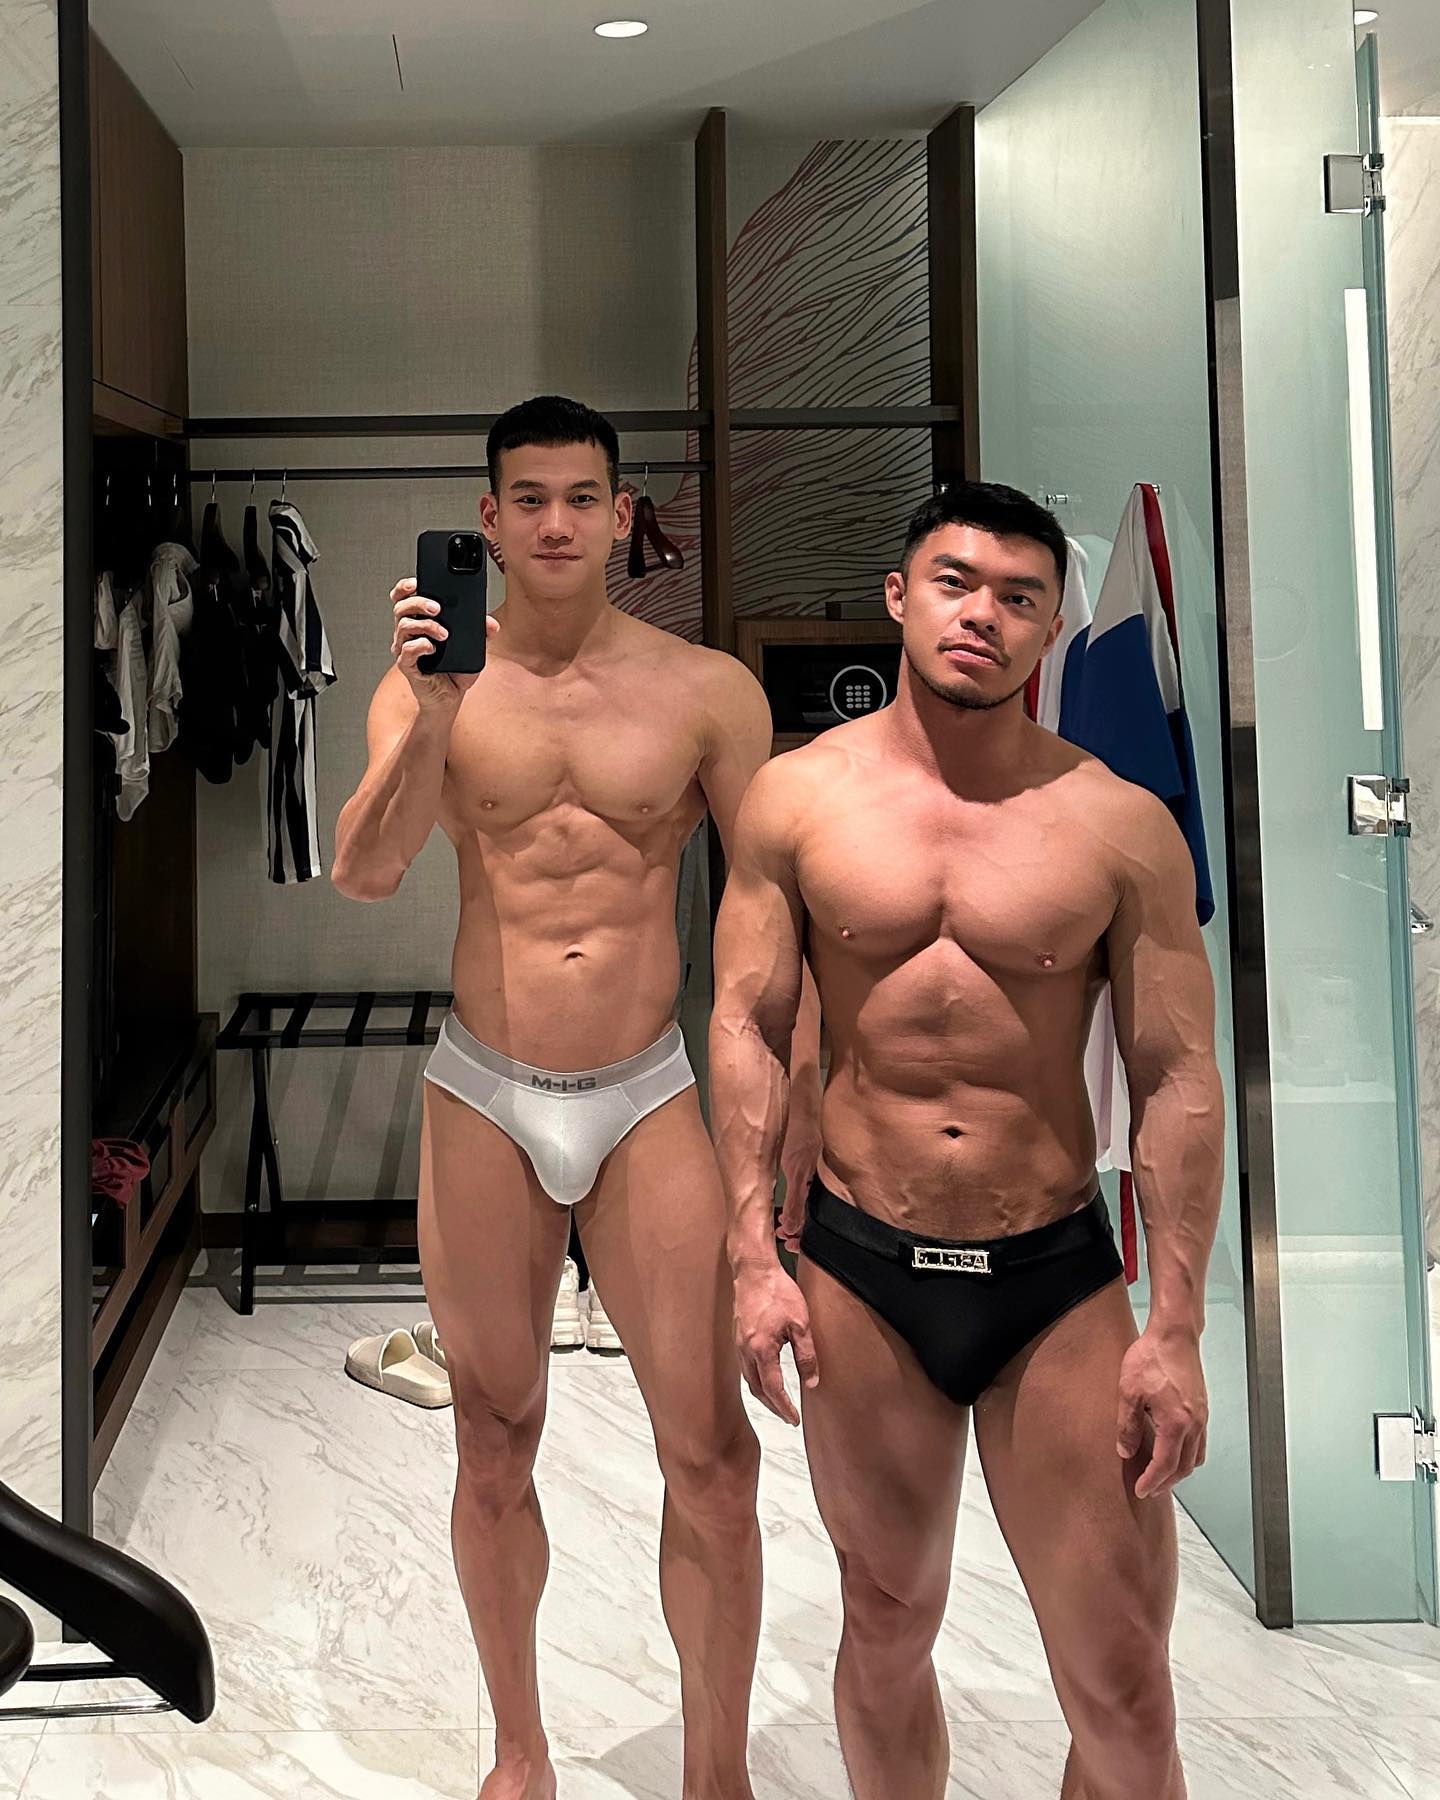 🙂 My collab with the hottest Vietnam porn star @callmekenvin__ is on! You know where to find it. Subscribe now ;)
OF: 🔎 uniquebrad